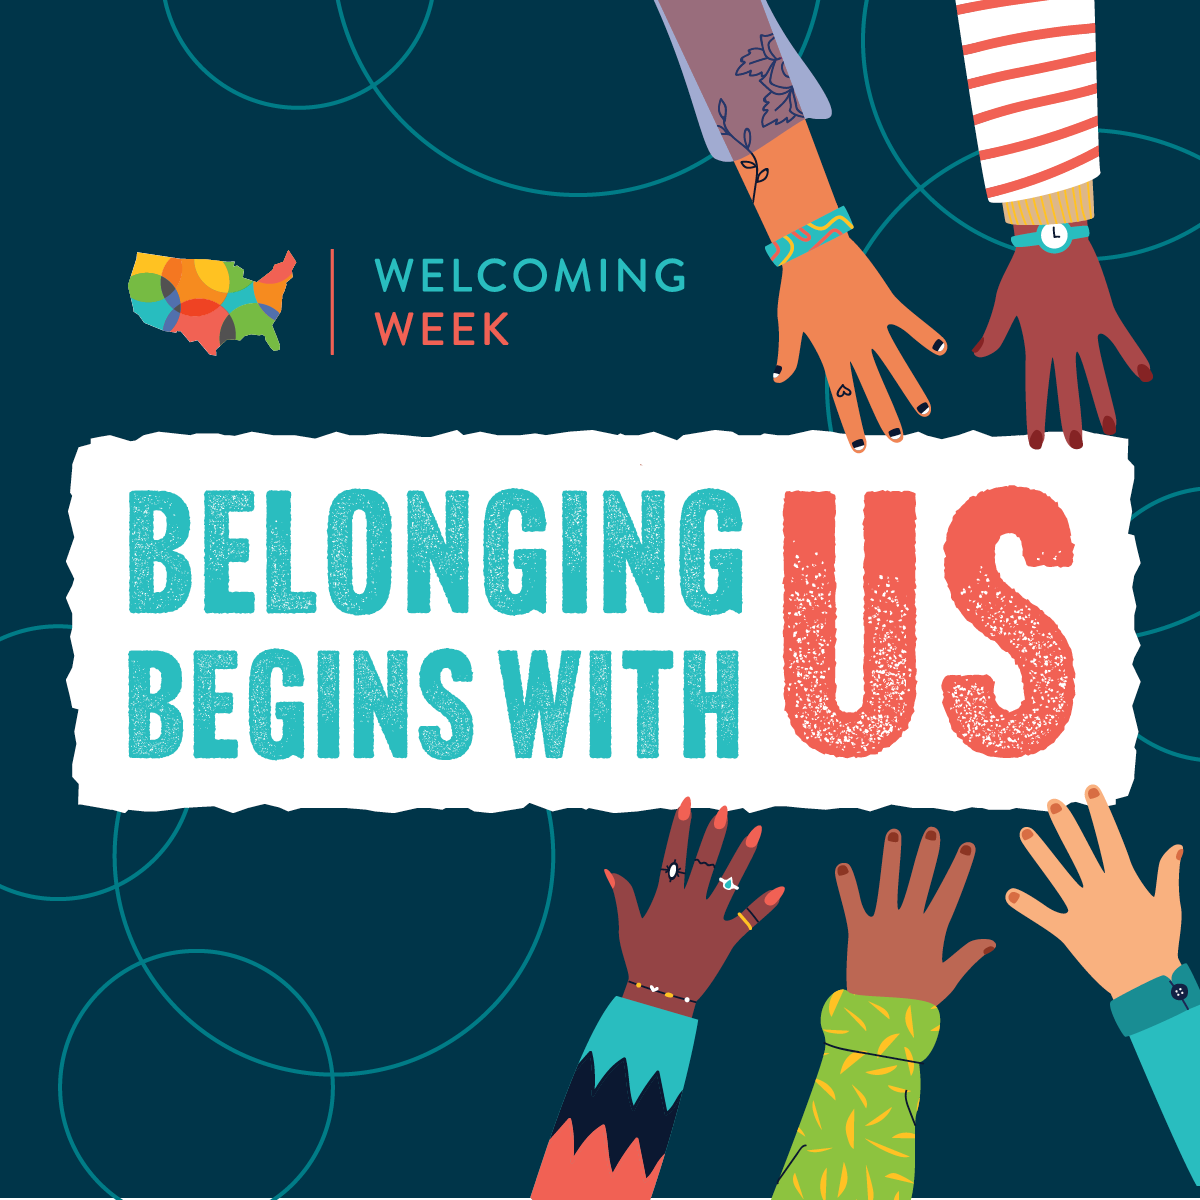 Welcoming Week graphic that illustrates outstretched hands around "Belonging begins with US"